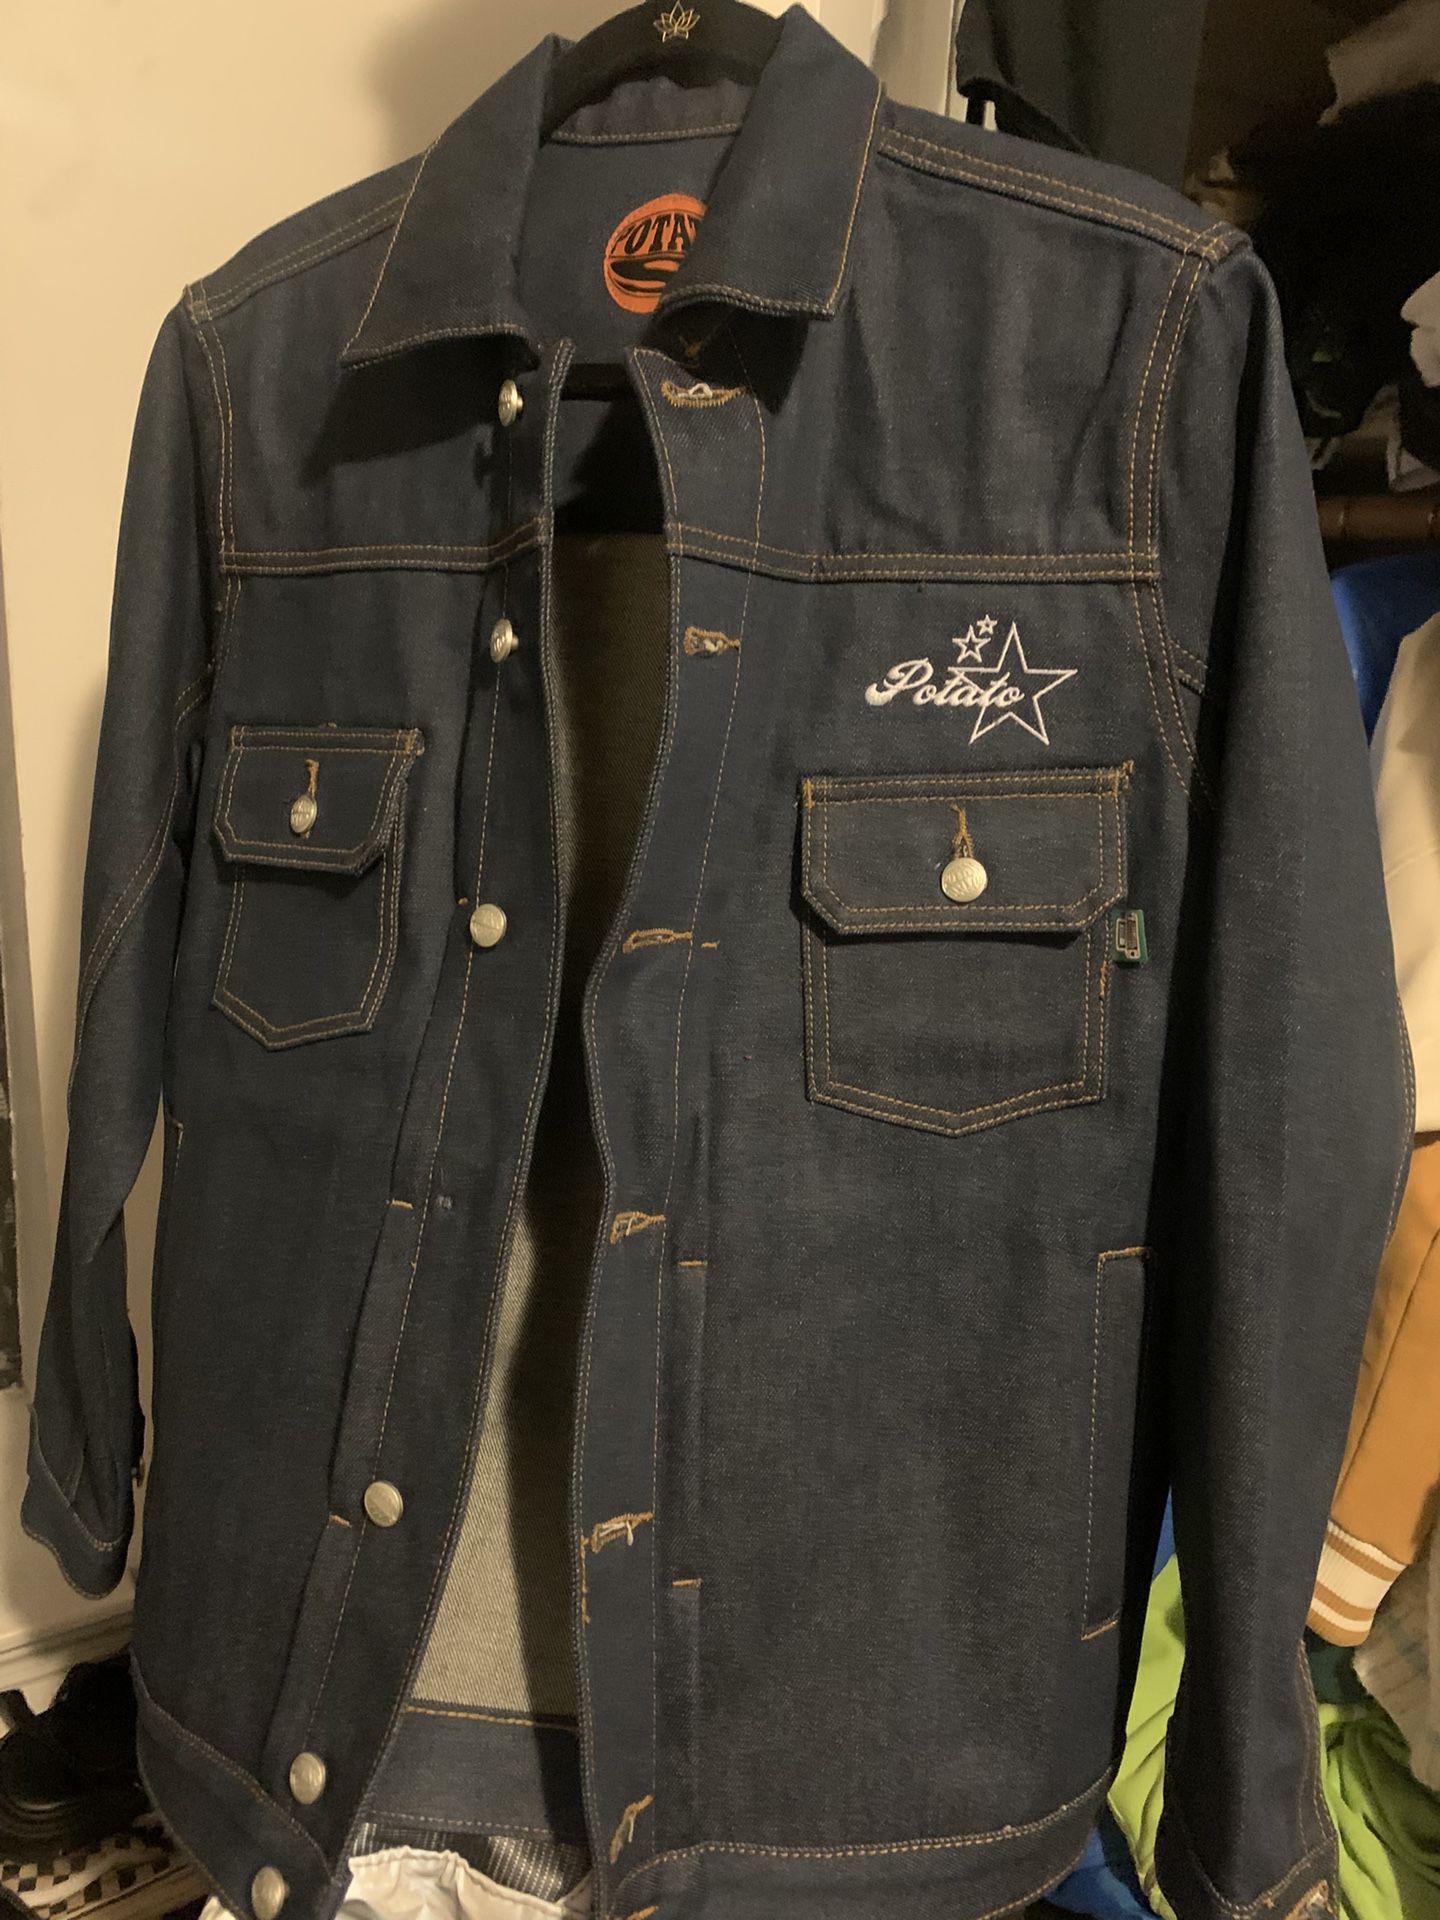 Imran Potato Denim Jacket for Sale in The Bronx, NY - OfferUp